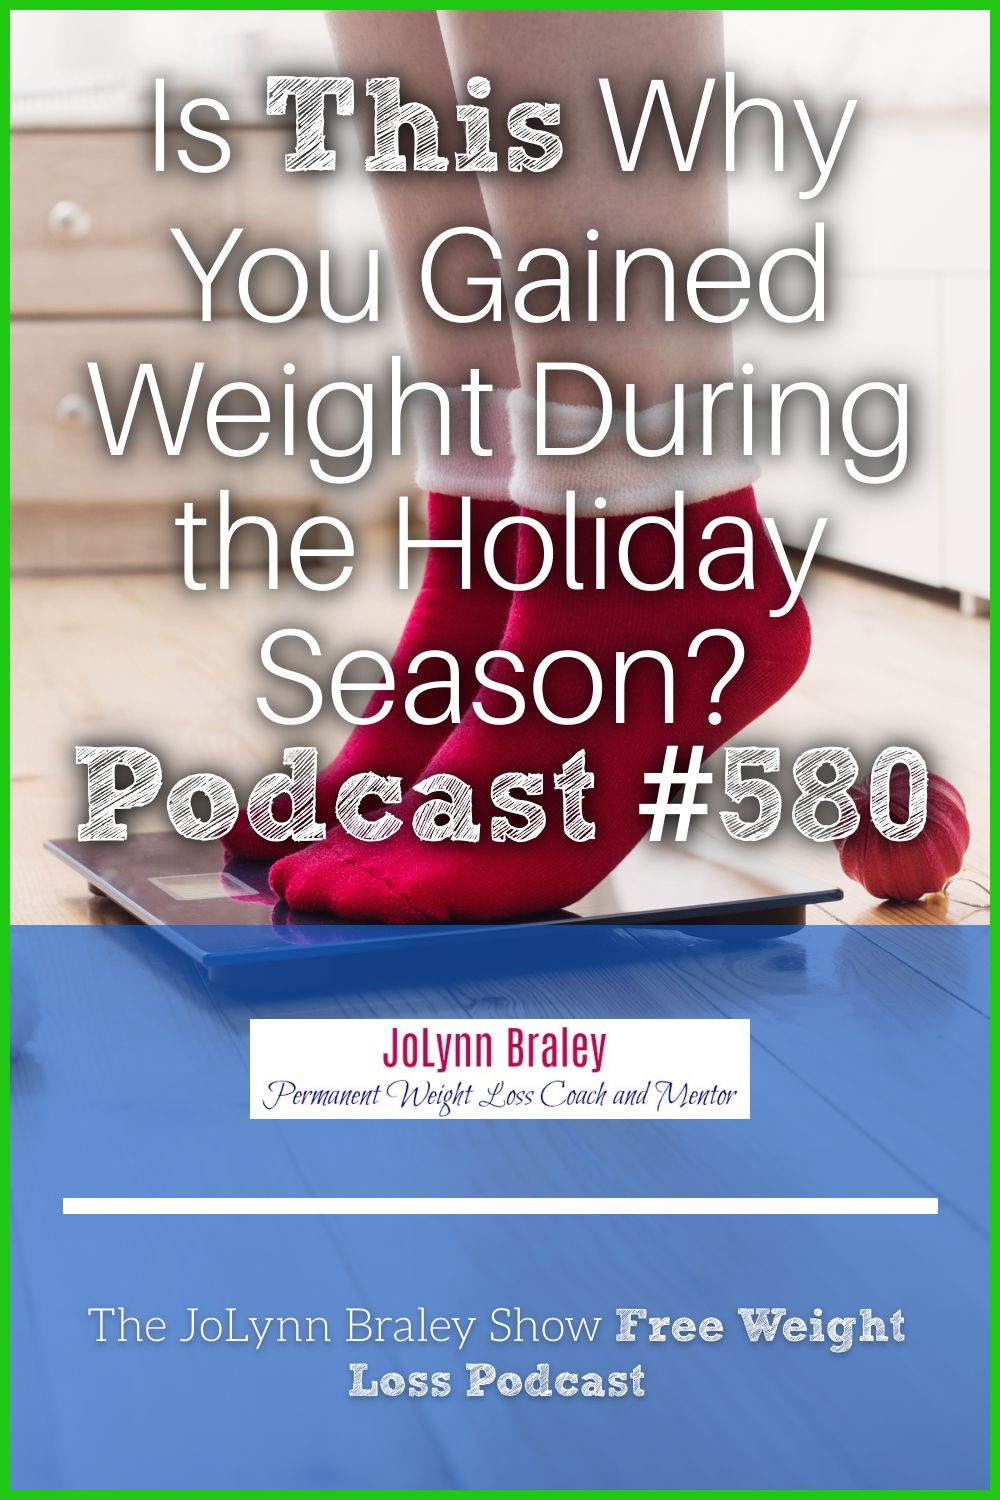 Discover: Is This What Caused Your Holiday Weight Gain? [Podcast #580]